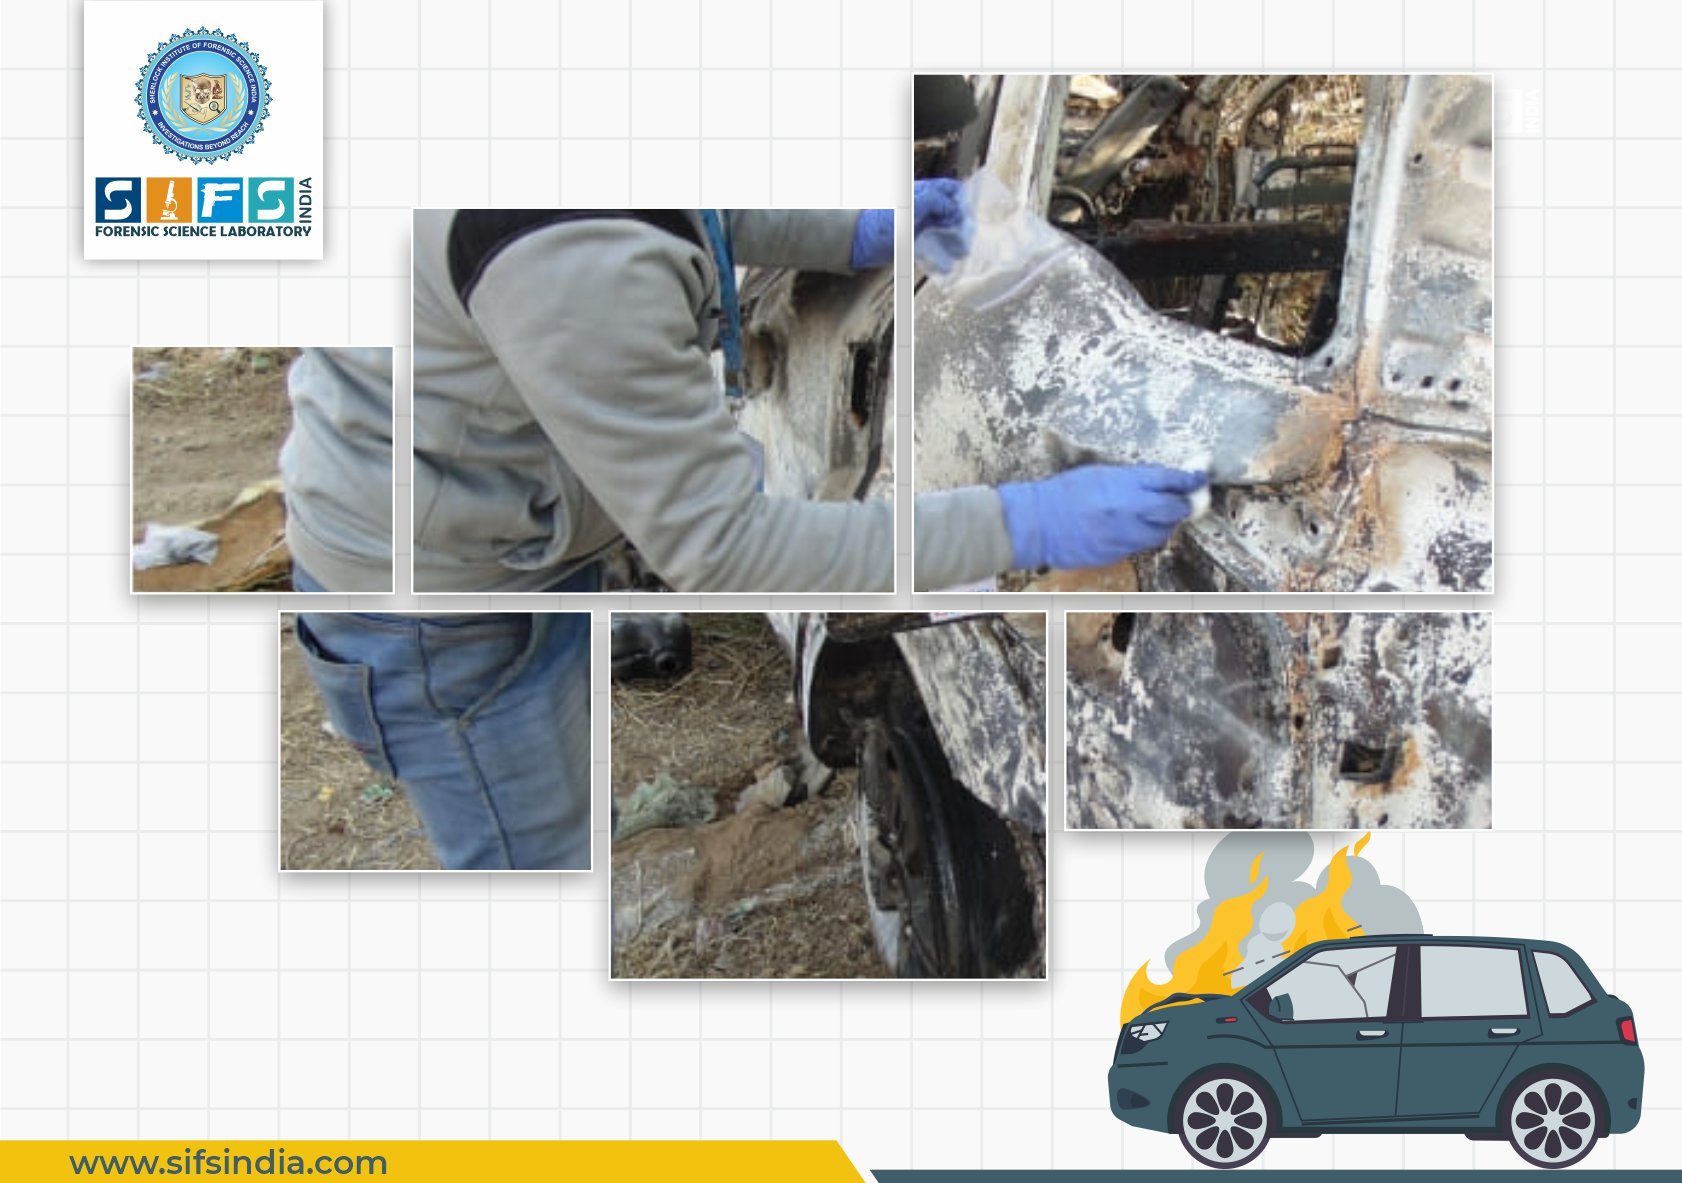 Art of Vehicle Fire Investigation